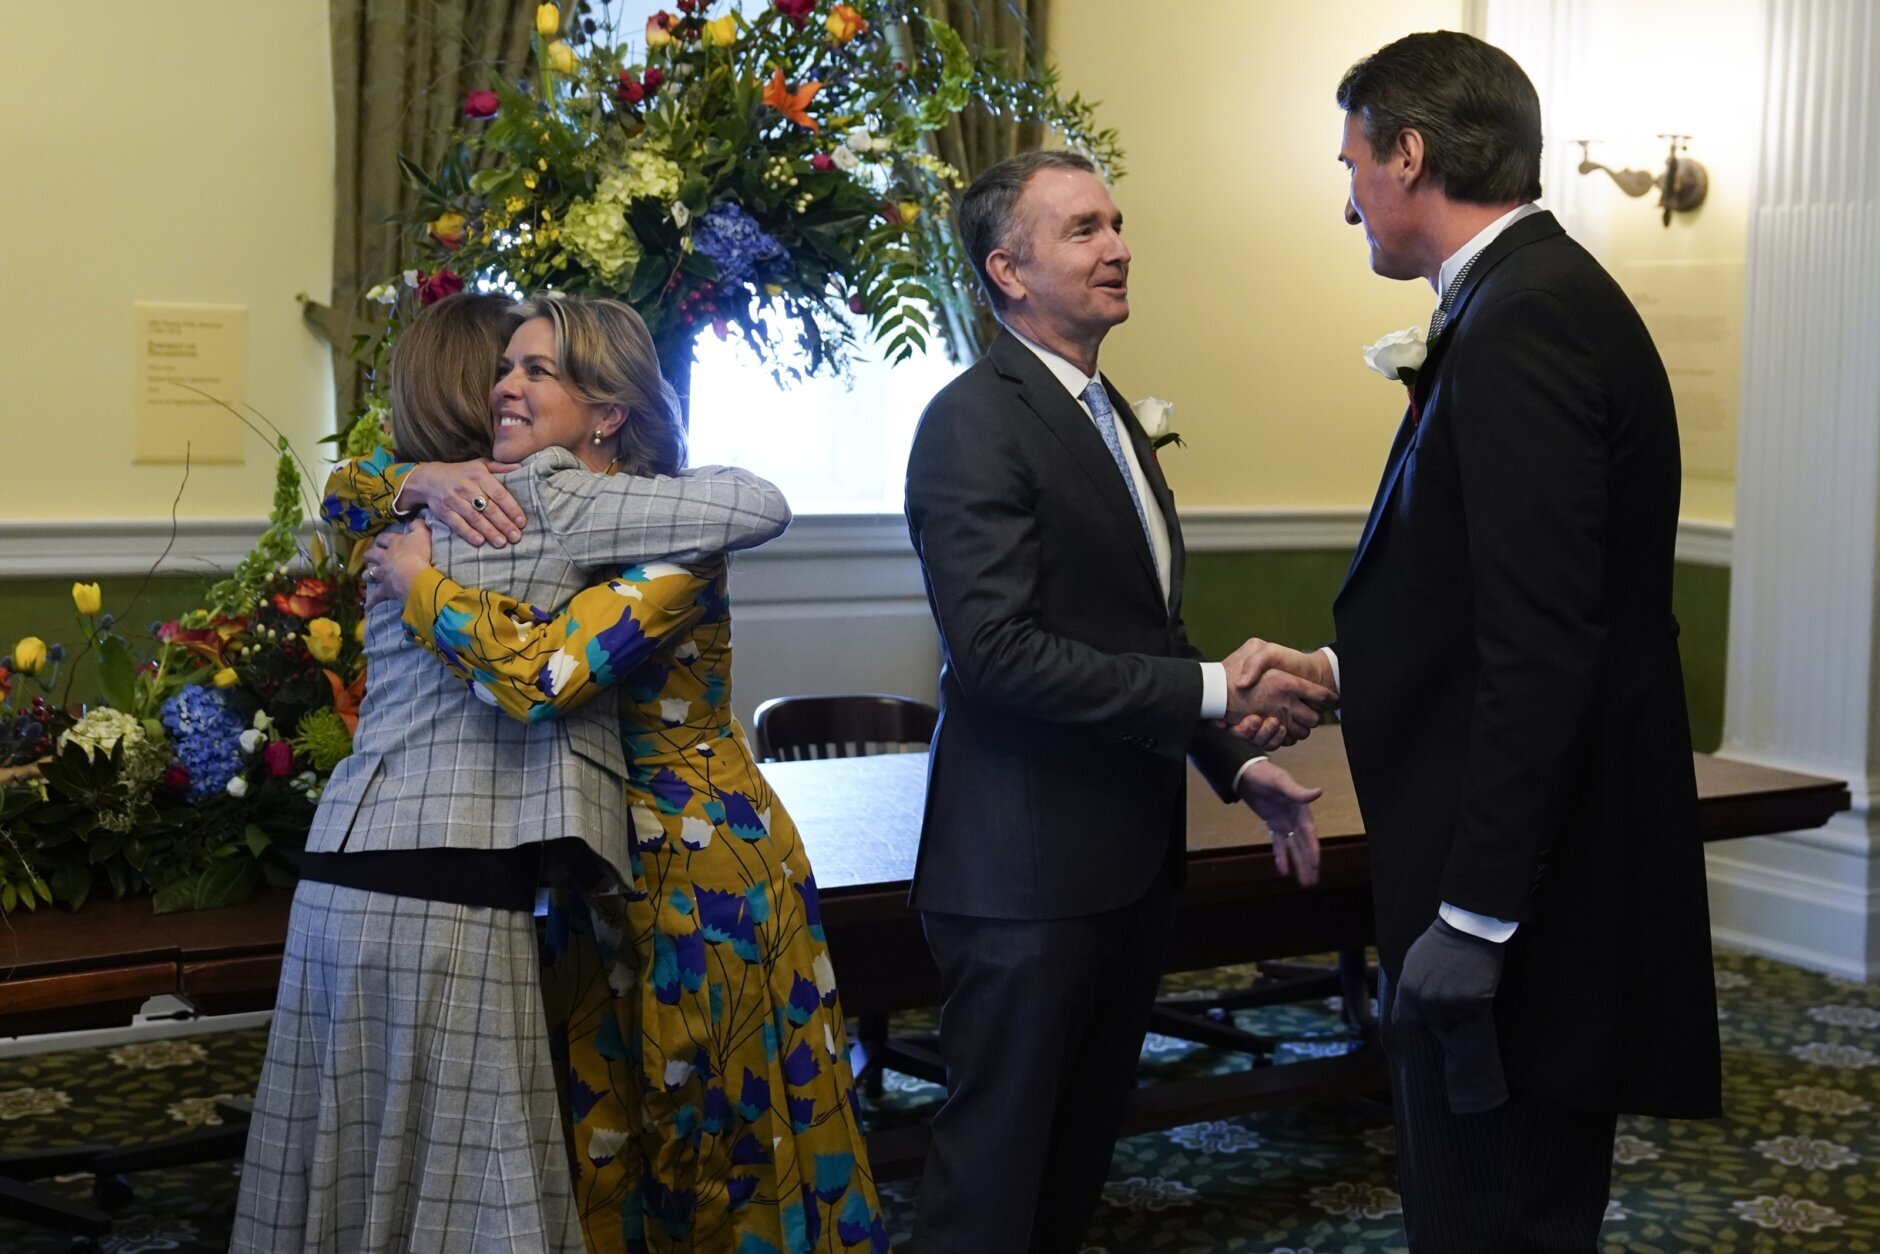 Virginia Gov. Ralph Northam greets Gov. elect Glenn Youngkin as Pam Northam, left, empraces Suzanne Youngkin before an inauguration ceremony, Saturday, Jan. 15, 2022, in Richmond, Va. (AP Photo/Steve Helber)